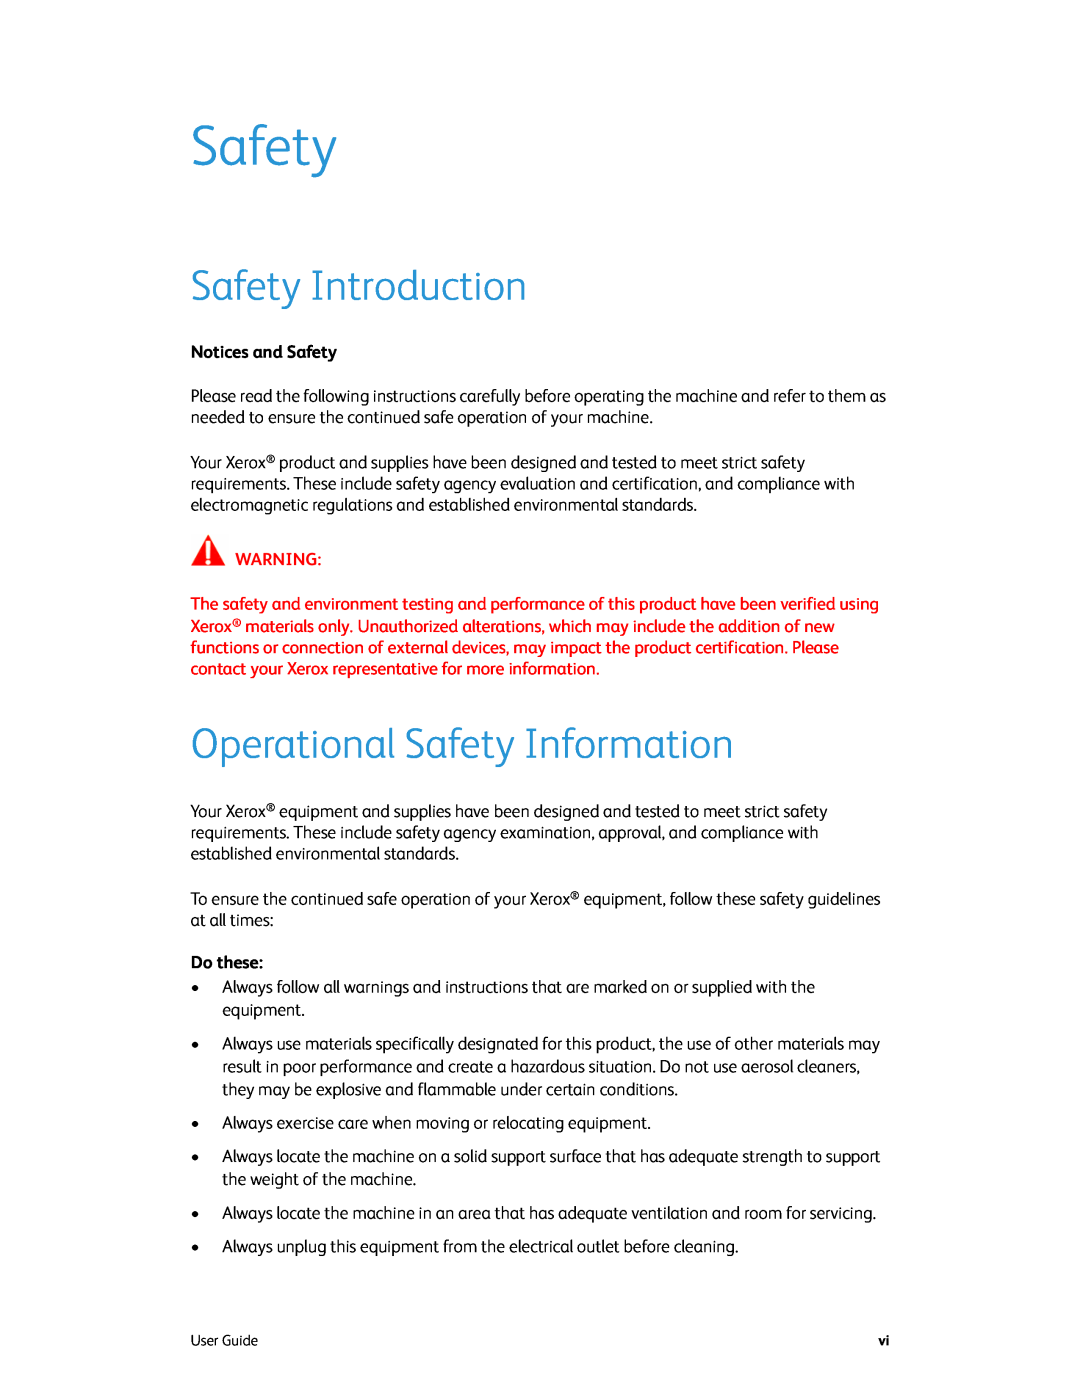 Xerox xerox manual Safety Introduction, Operational Safety Information 